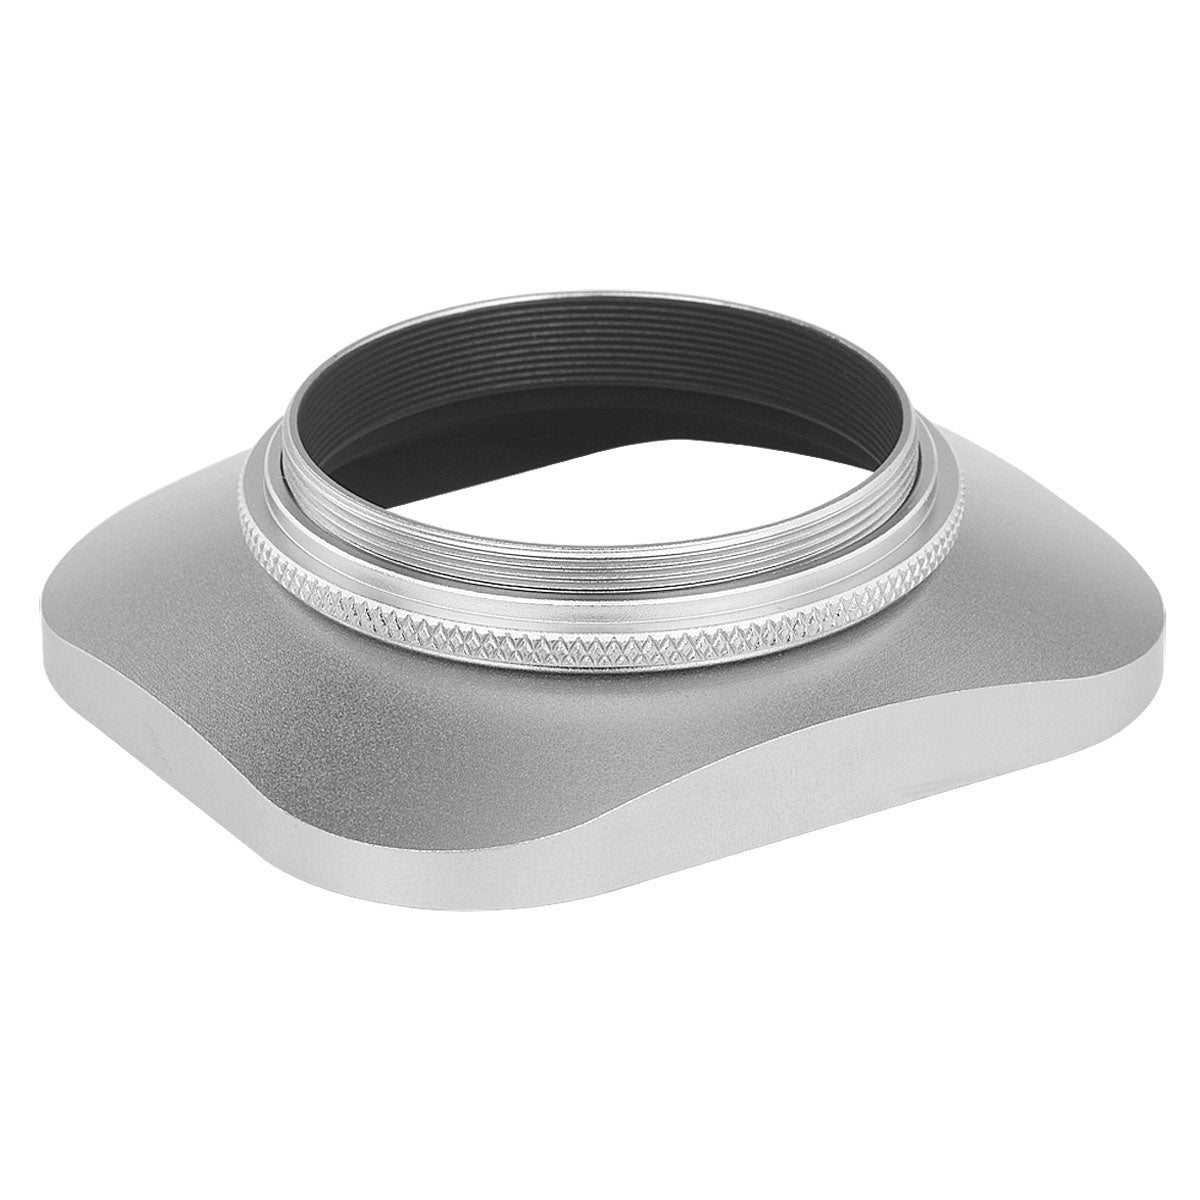 Haoge LH-LC43W 43mm Square Metal Screw-in Lens Hood with Cap for Voigtlander Nokton Classic 35mm f1.4 40mm f/1.4 MC SC VM, Carl Zeiss Biogon T ZM 35mm f2.8 35mm f2, Leica X Typ 113 Lens Silver